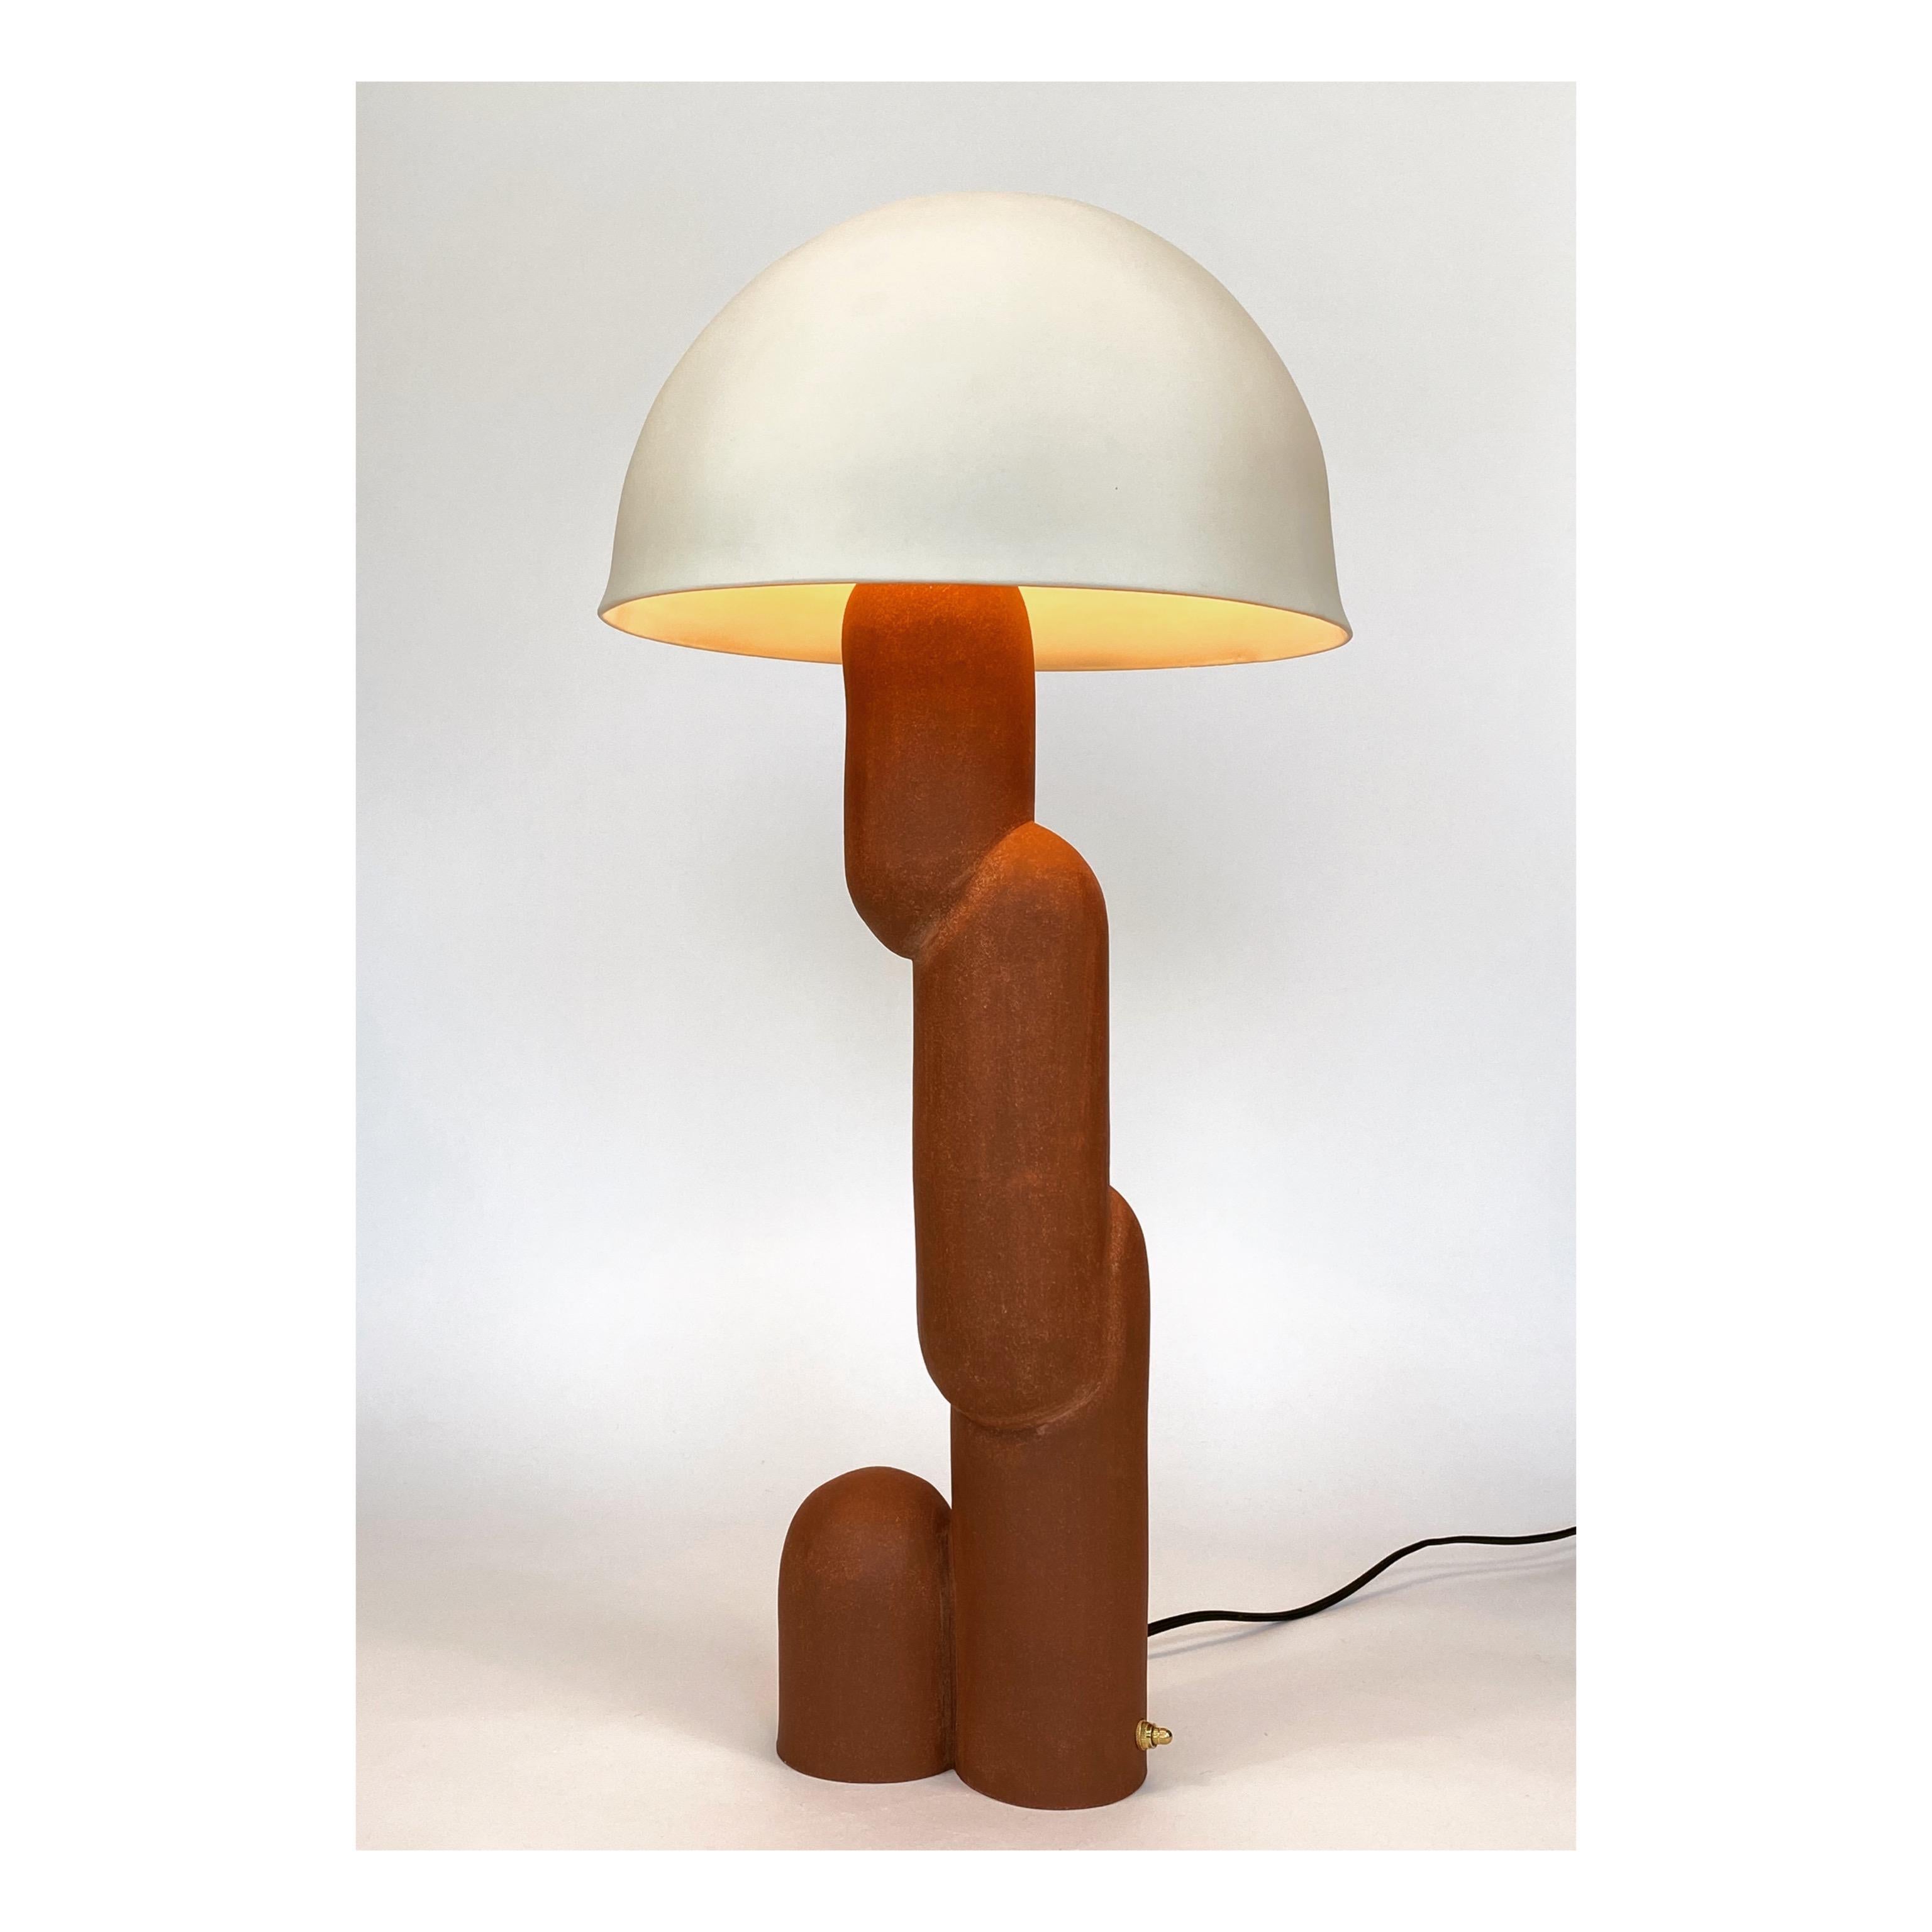 Torpedo 4.0 lamp by Sunshine Thacker
Dimensions: D 36.8 x H 76.2 cm
Materials: Stoneware, porcelain
Also available: Available in a white stoneware with custom glazes or in a red or basalt raw clay body. Variable height as specified.
Photographed